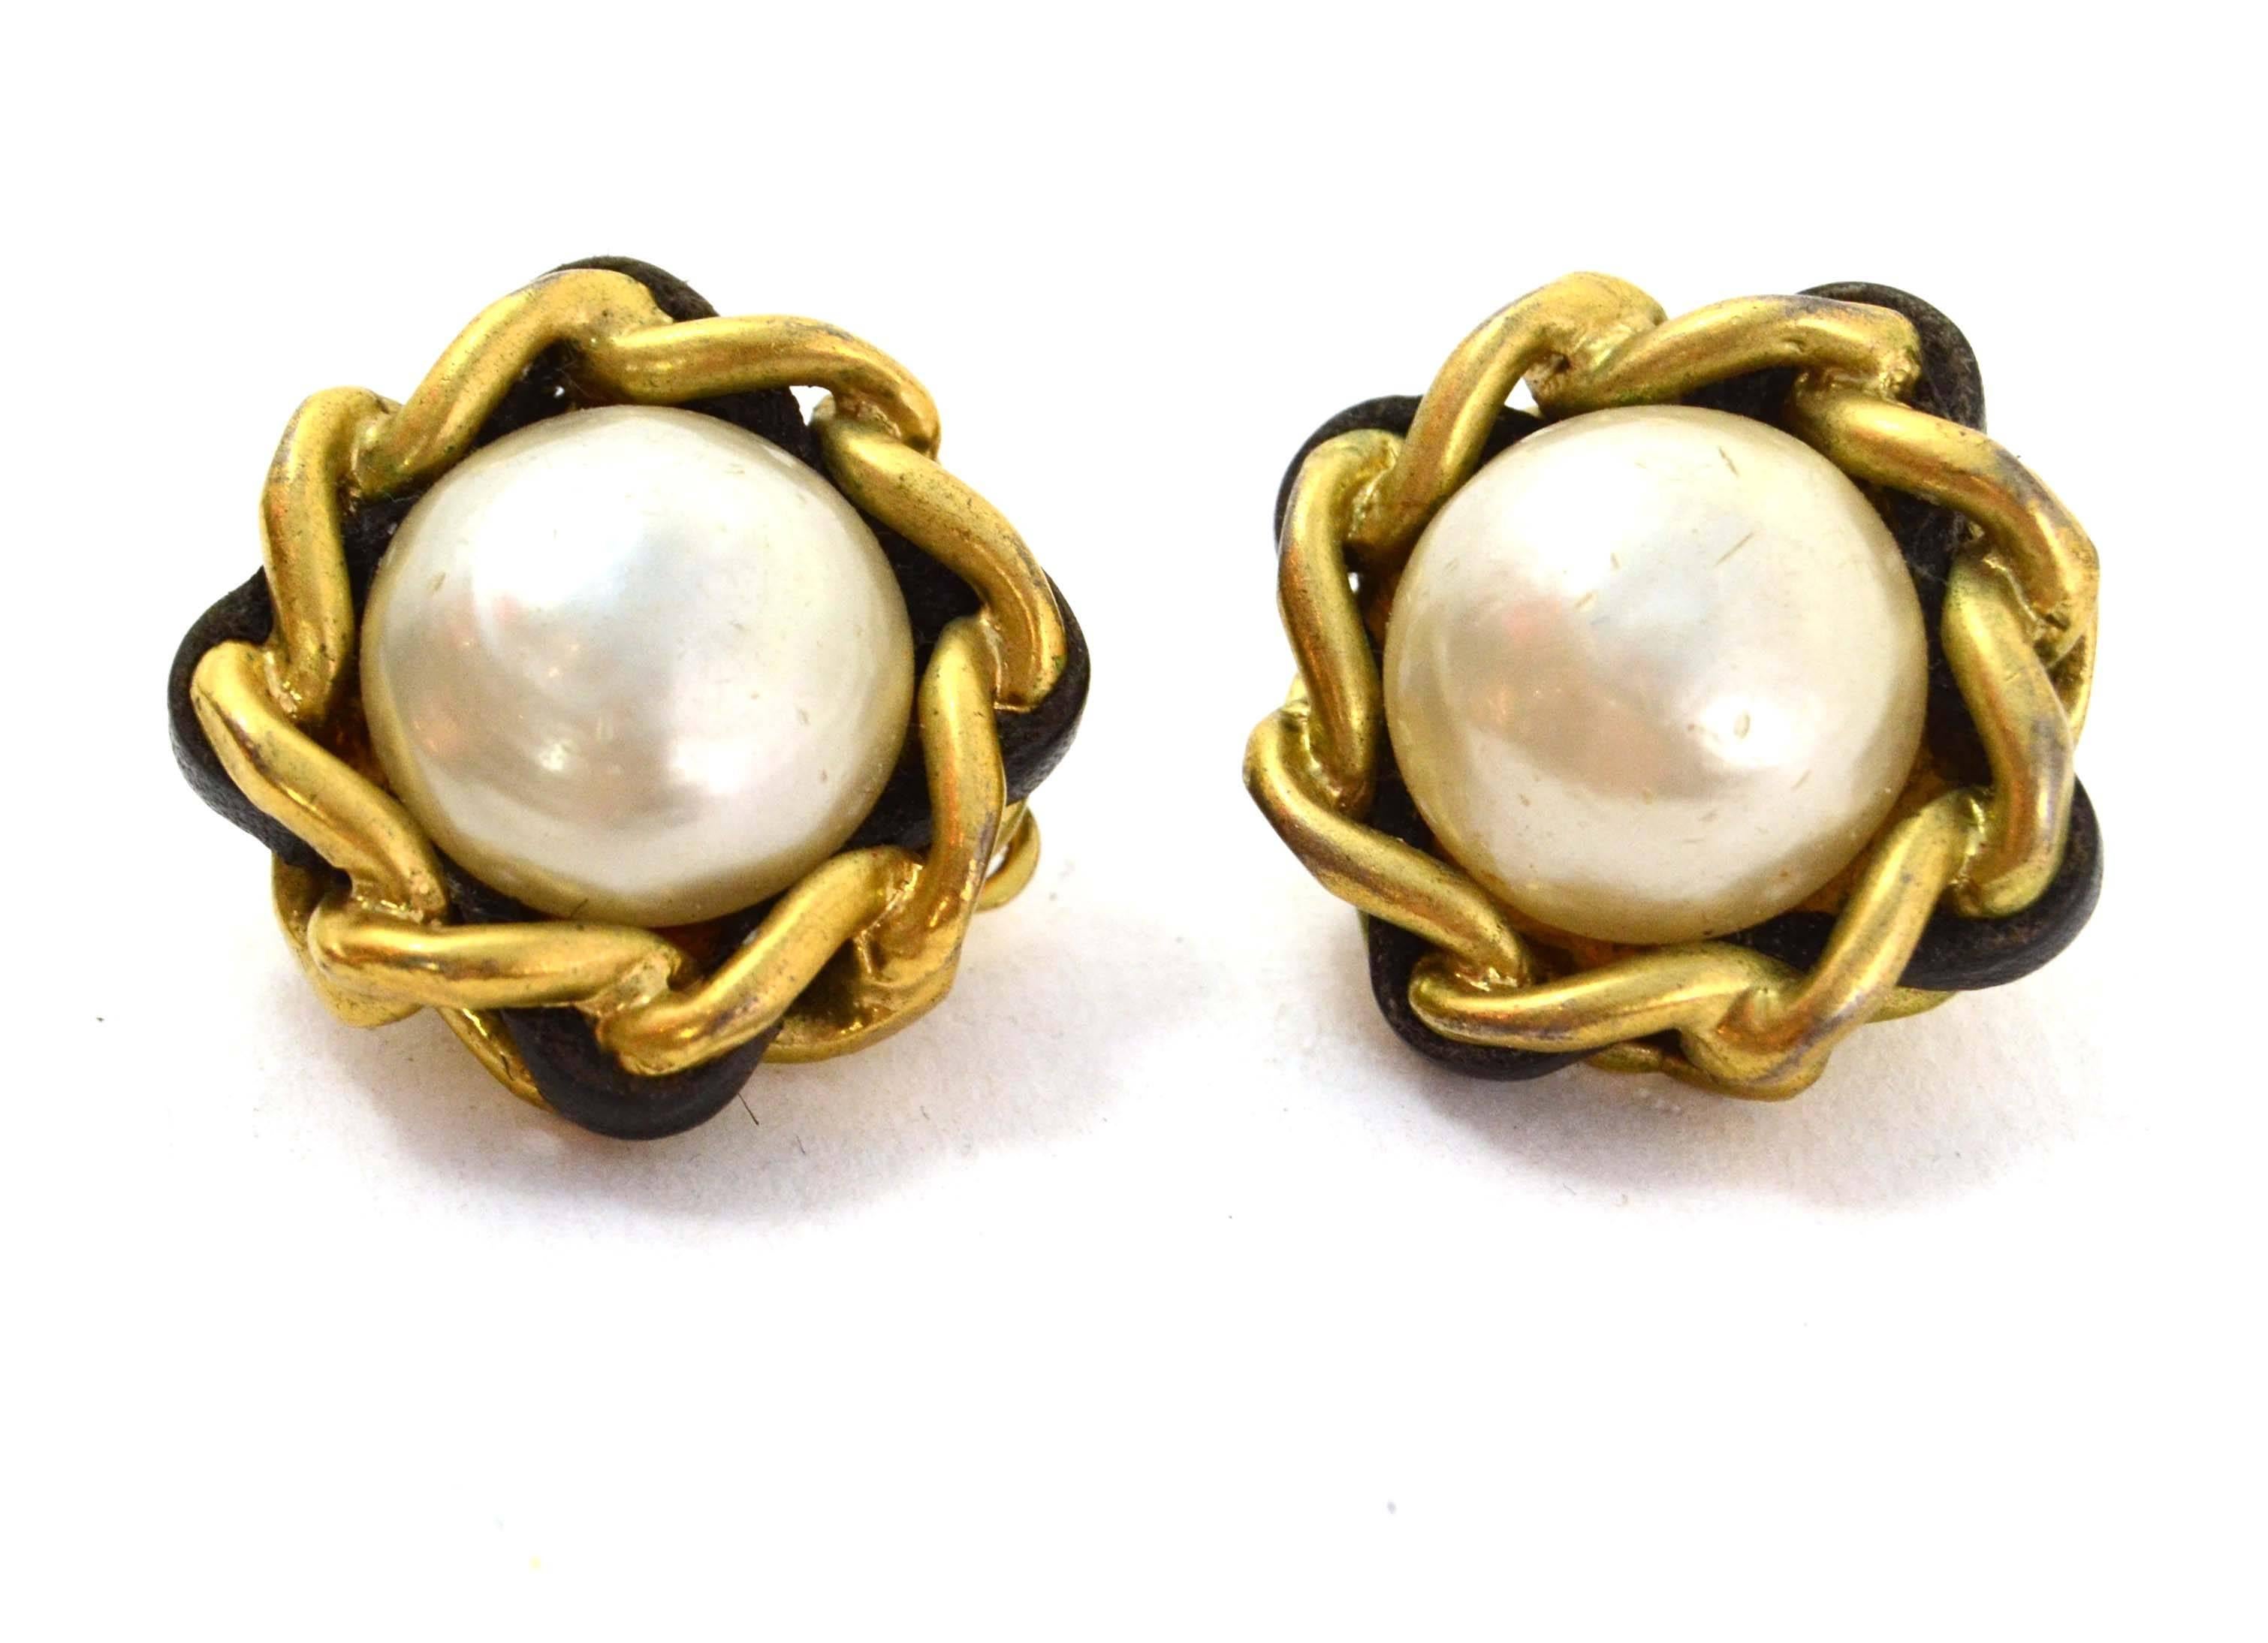 Chanel Vintage '93 Pearl Clip On Earrings 
Features leather woven chain link detail surrounding pearl
Made In: France
Year of Production: 1993
Color: Ivory, goldtone and black
Materials: Faux pearl, metal, and leather
Closure: Clip on
Stamp: 93 CC